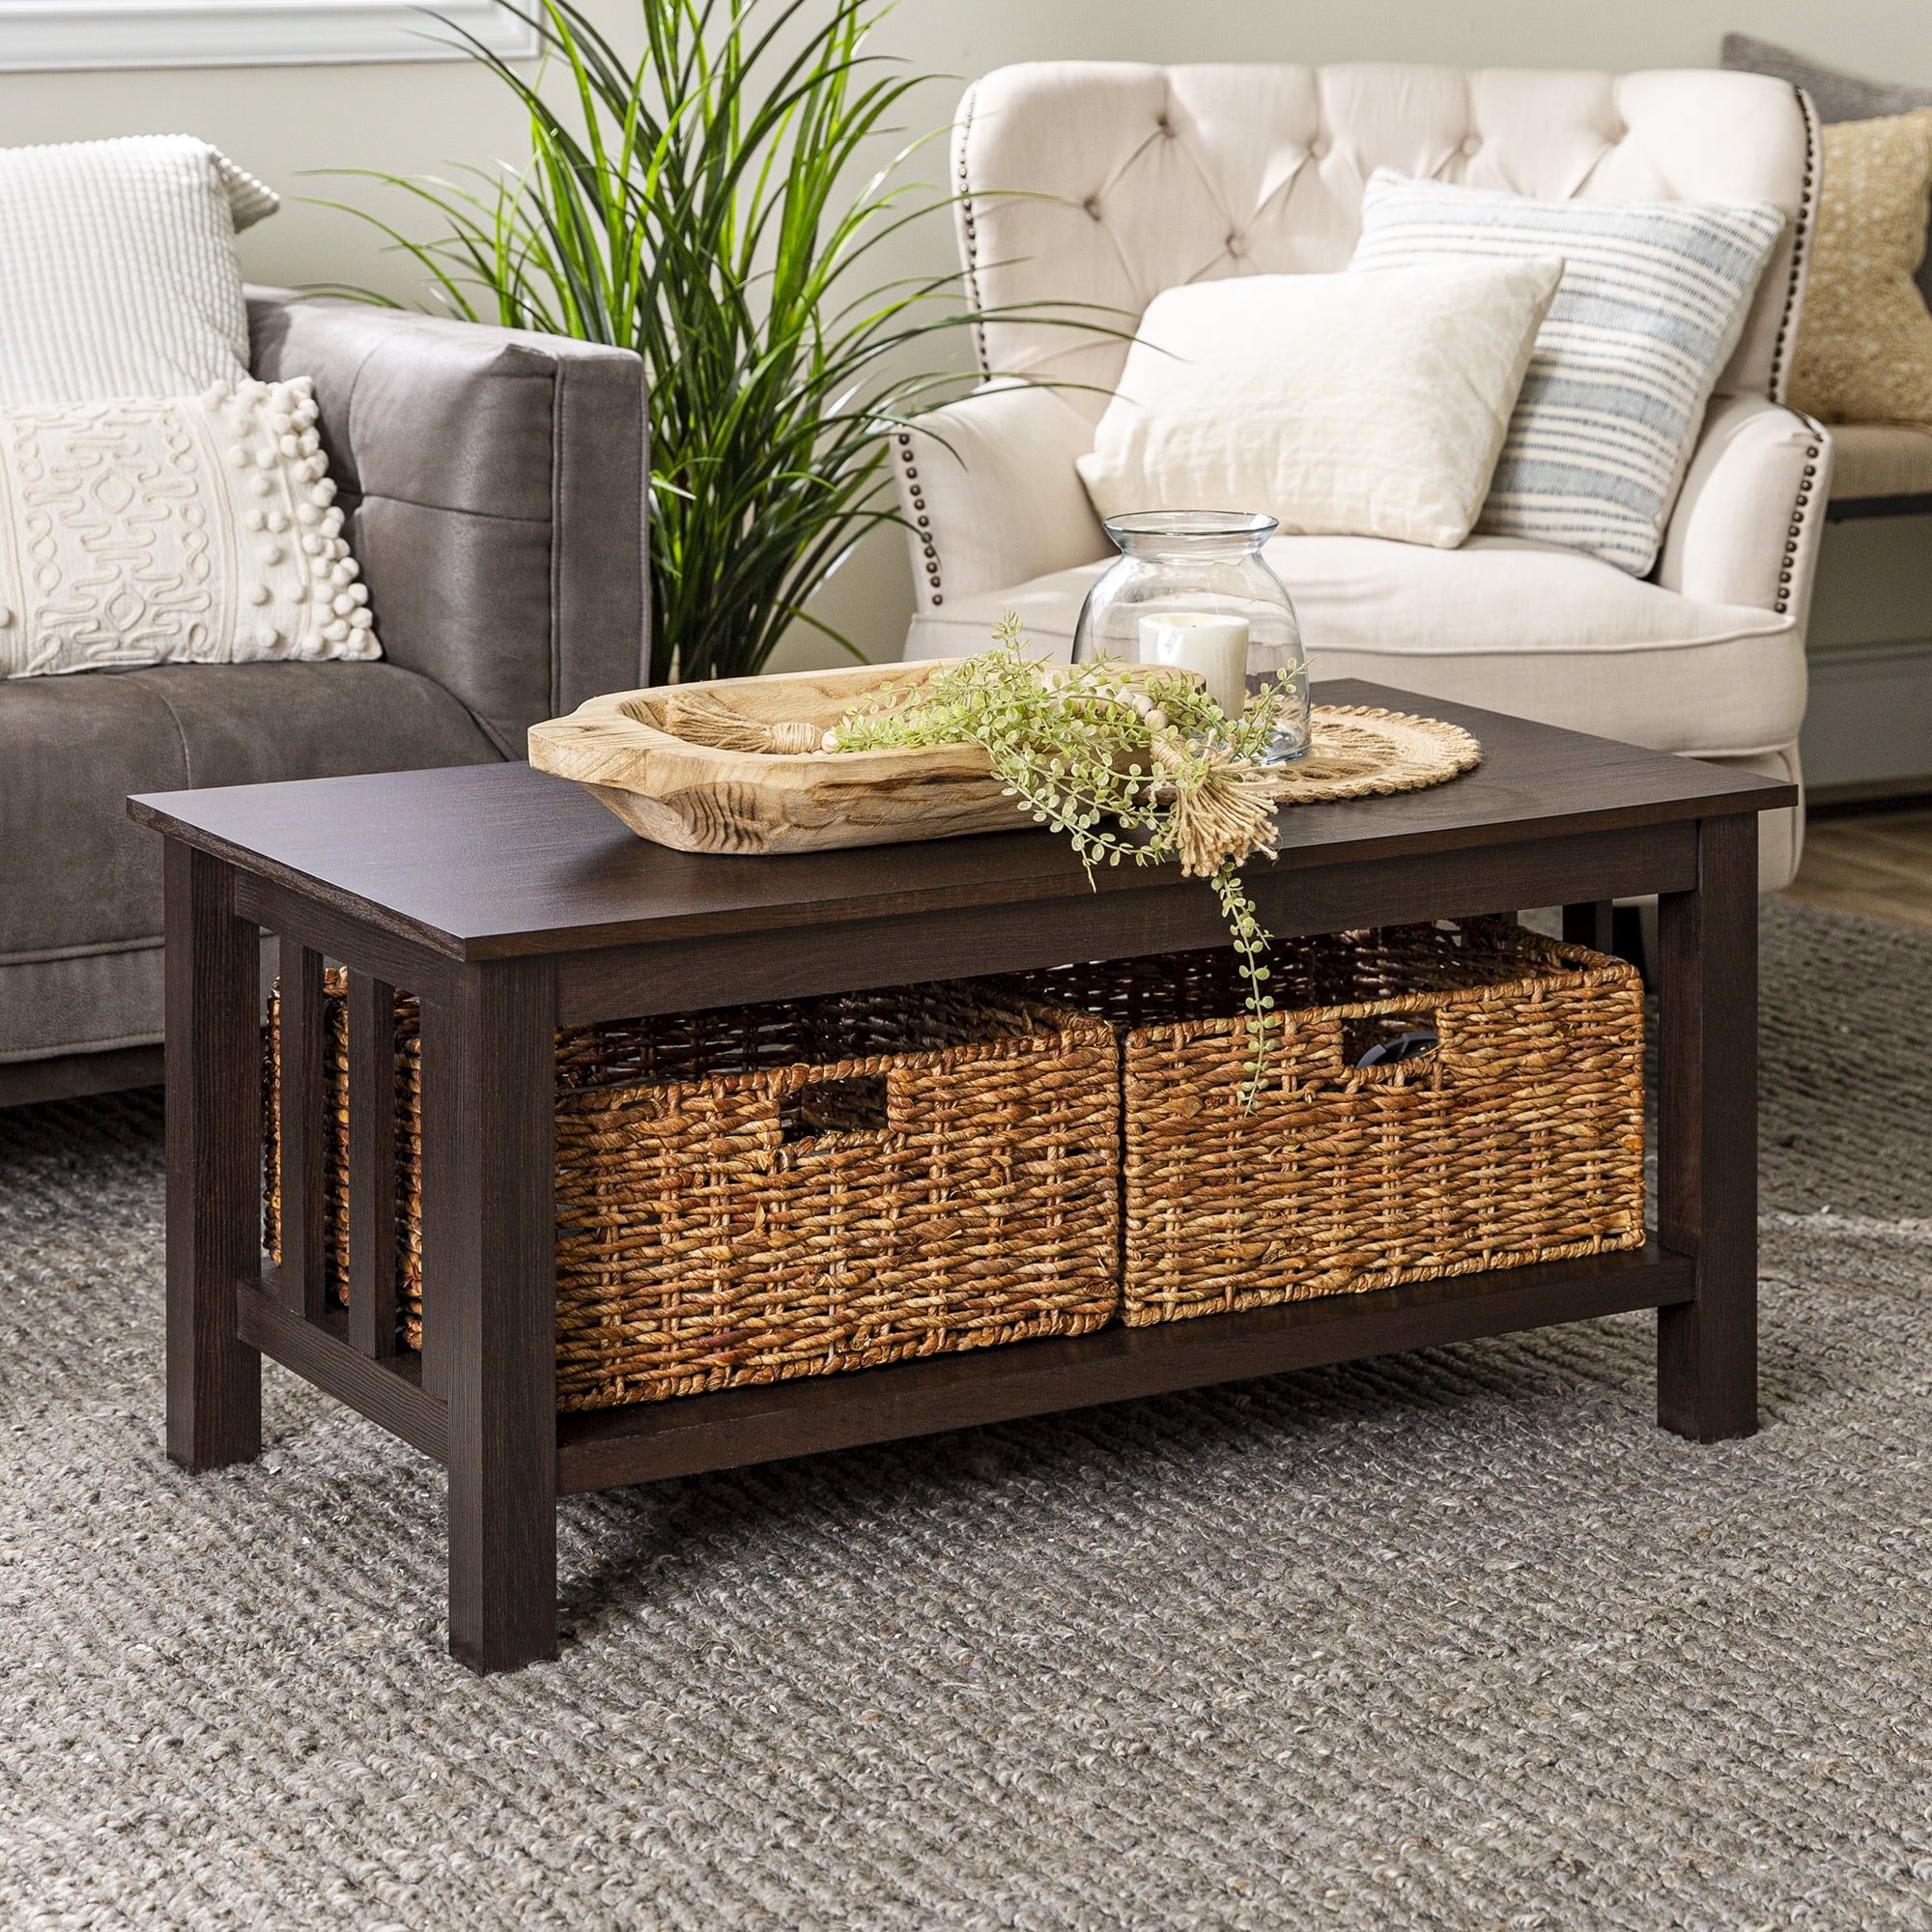 Woven Paths Traditional Storage Coffee Table With Bins, Espresso Inside Woven Paths Coffee Tables (View 8 of 15)